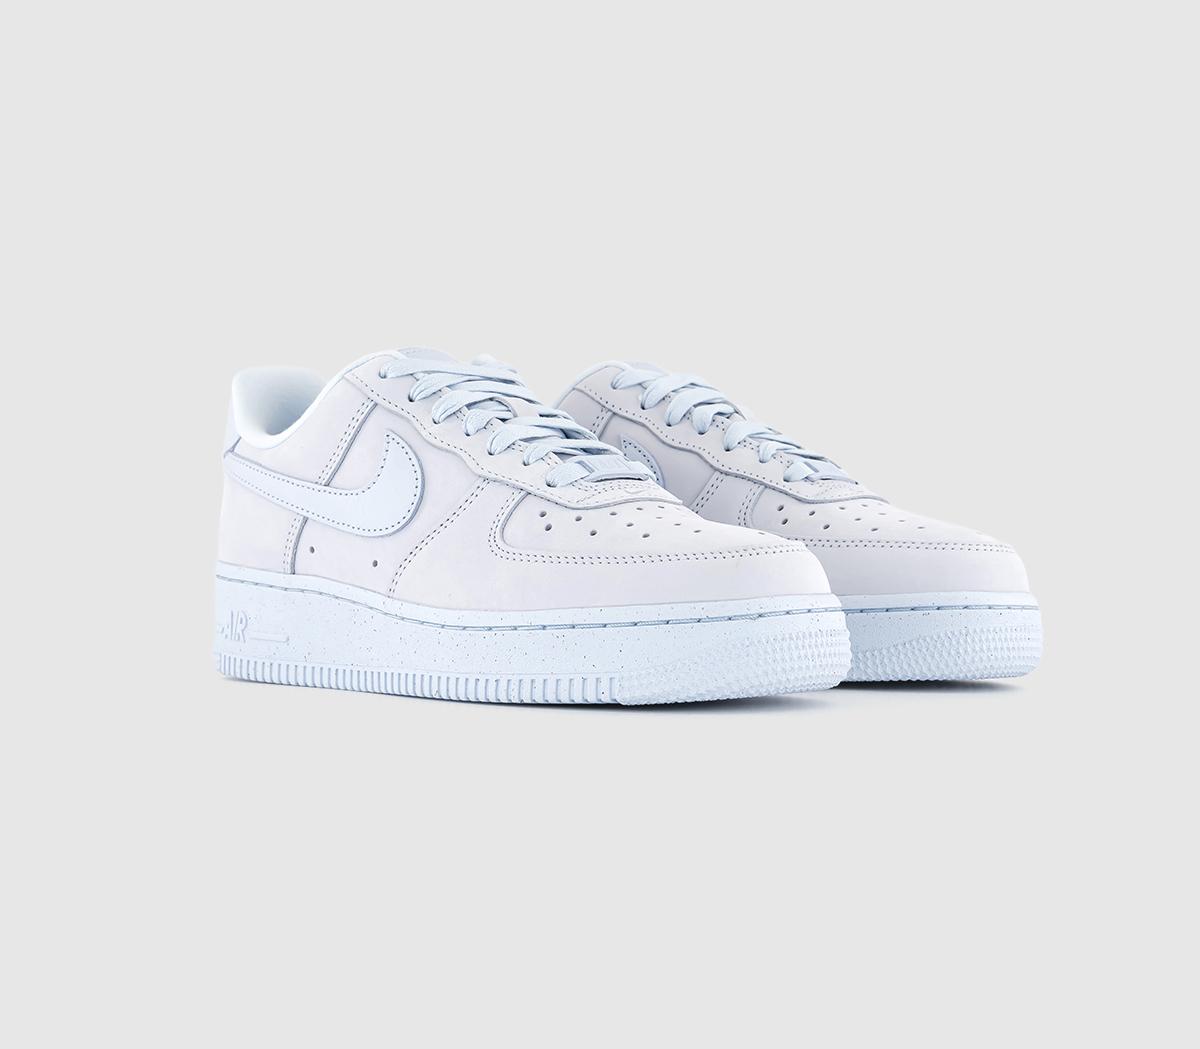 Nike Air Force 1 ’07 Prm Trainers Blue Tint, 6.5